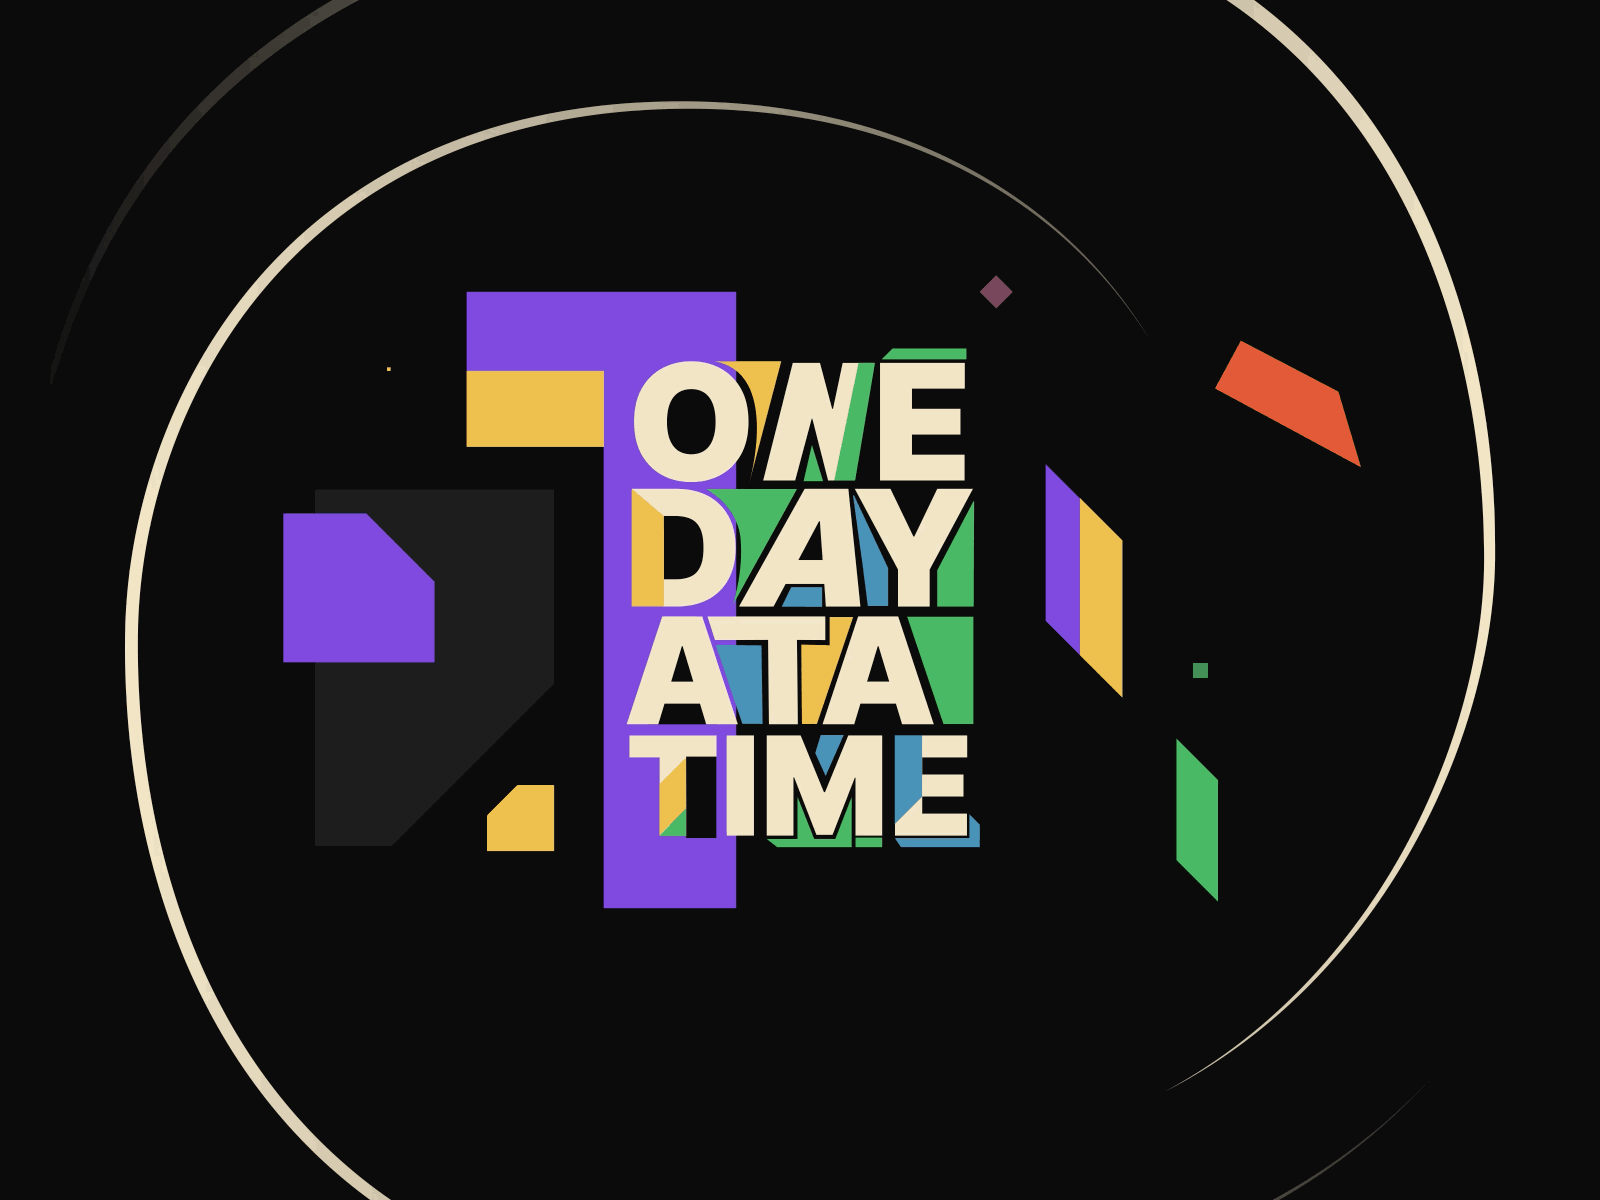 One day at a time animation art art direction artwork branding design illustration layout motion motion design motion graphics motivation one day positive product stay positive time typography uiux vector